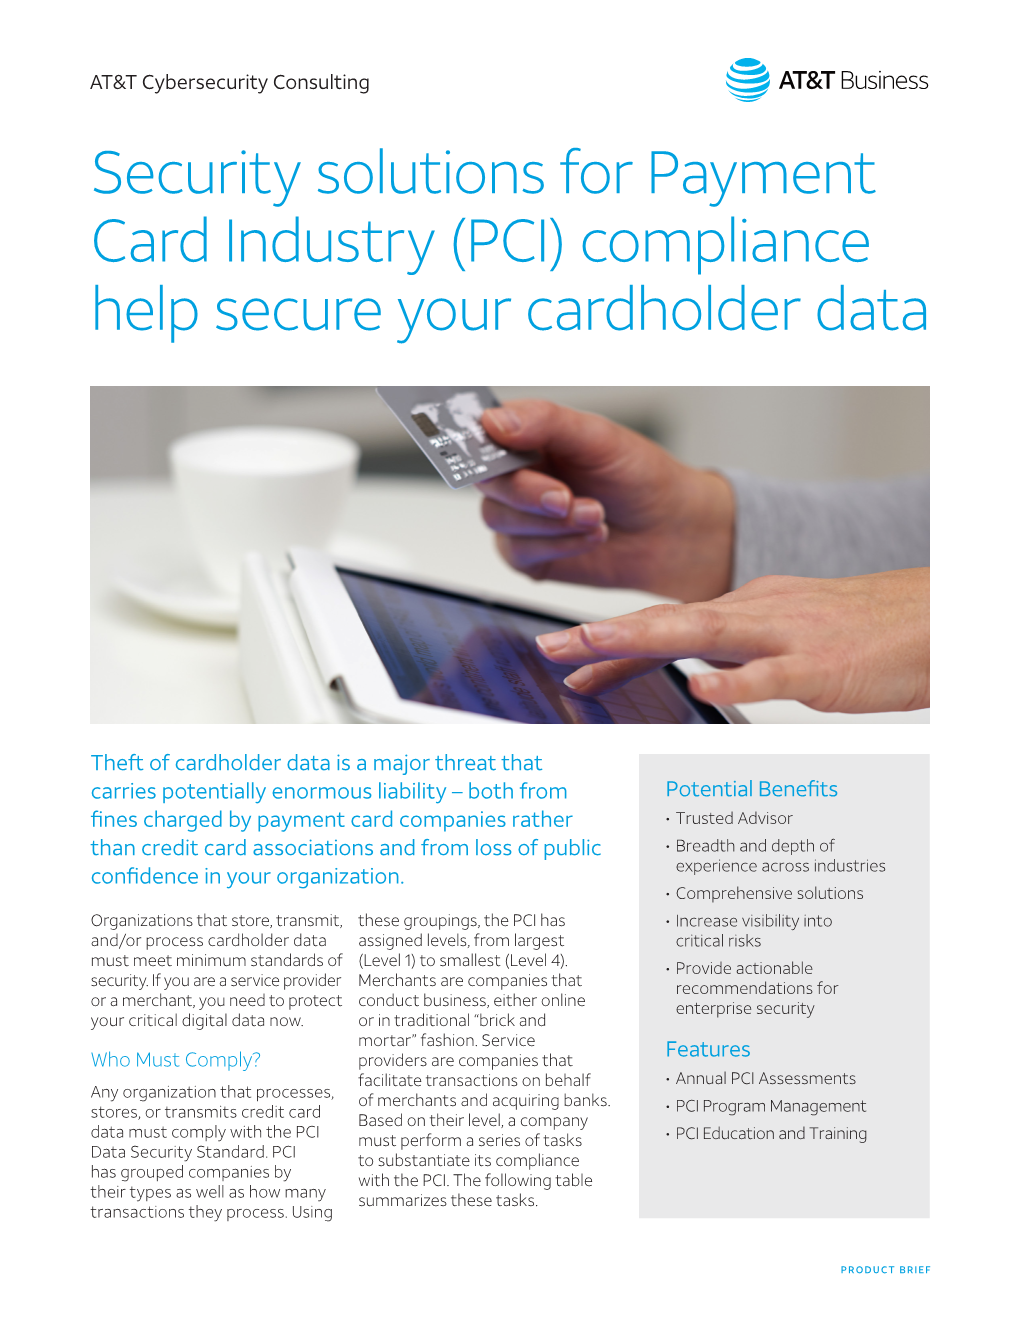 (PCI) Compliance Help Secure Your Cardholder Data